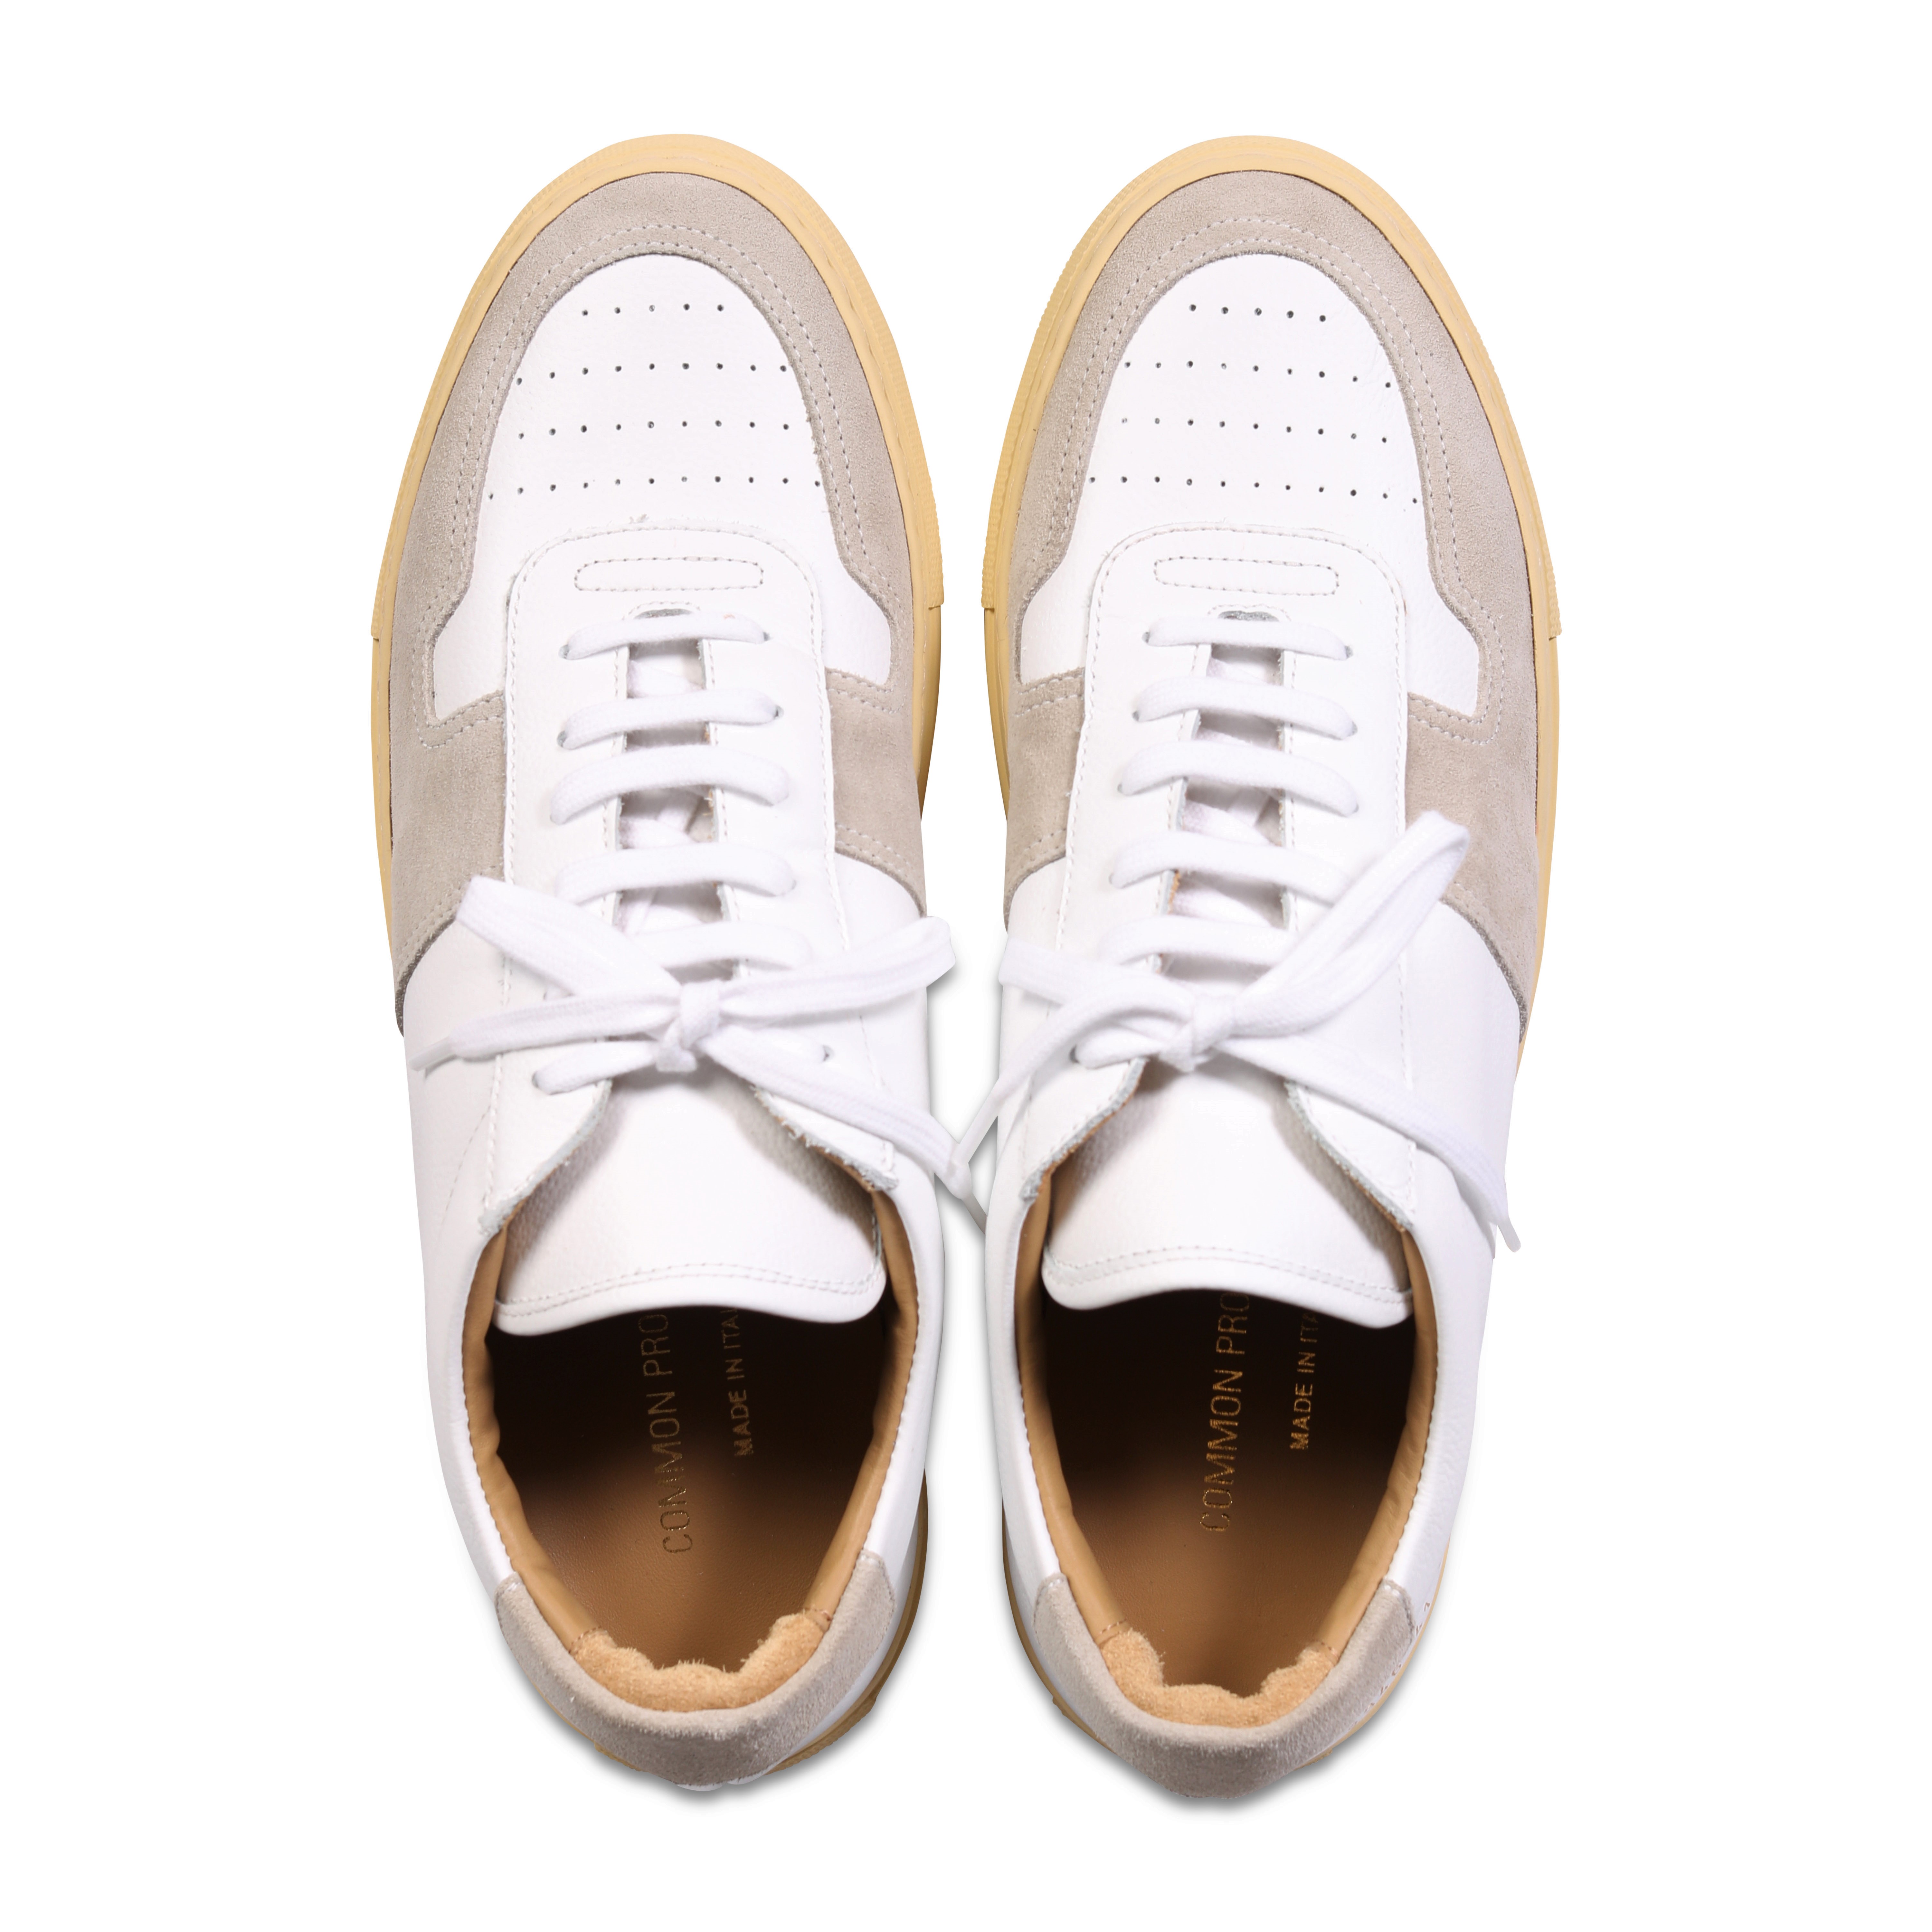 Common Projects Sneaker Bball Low Multi